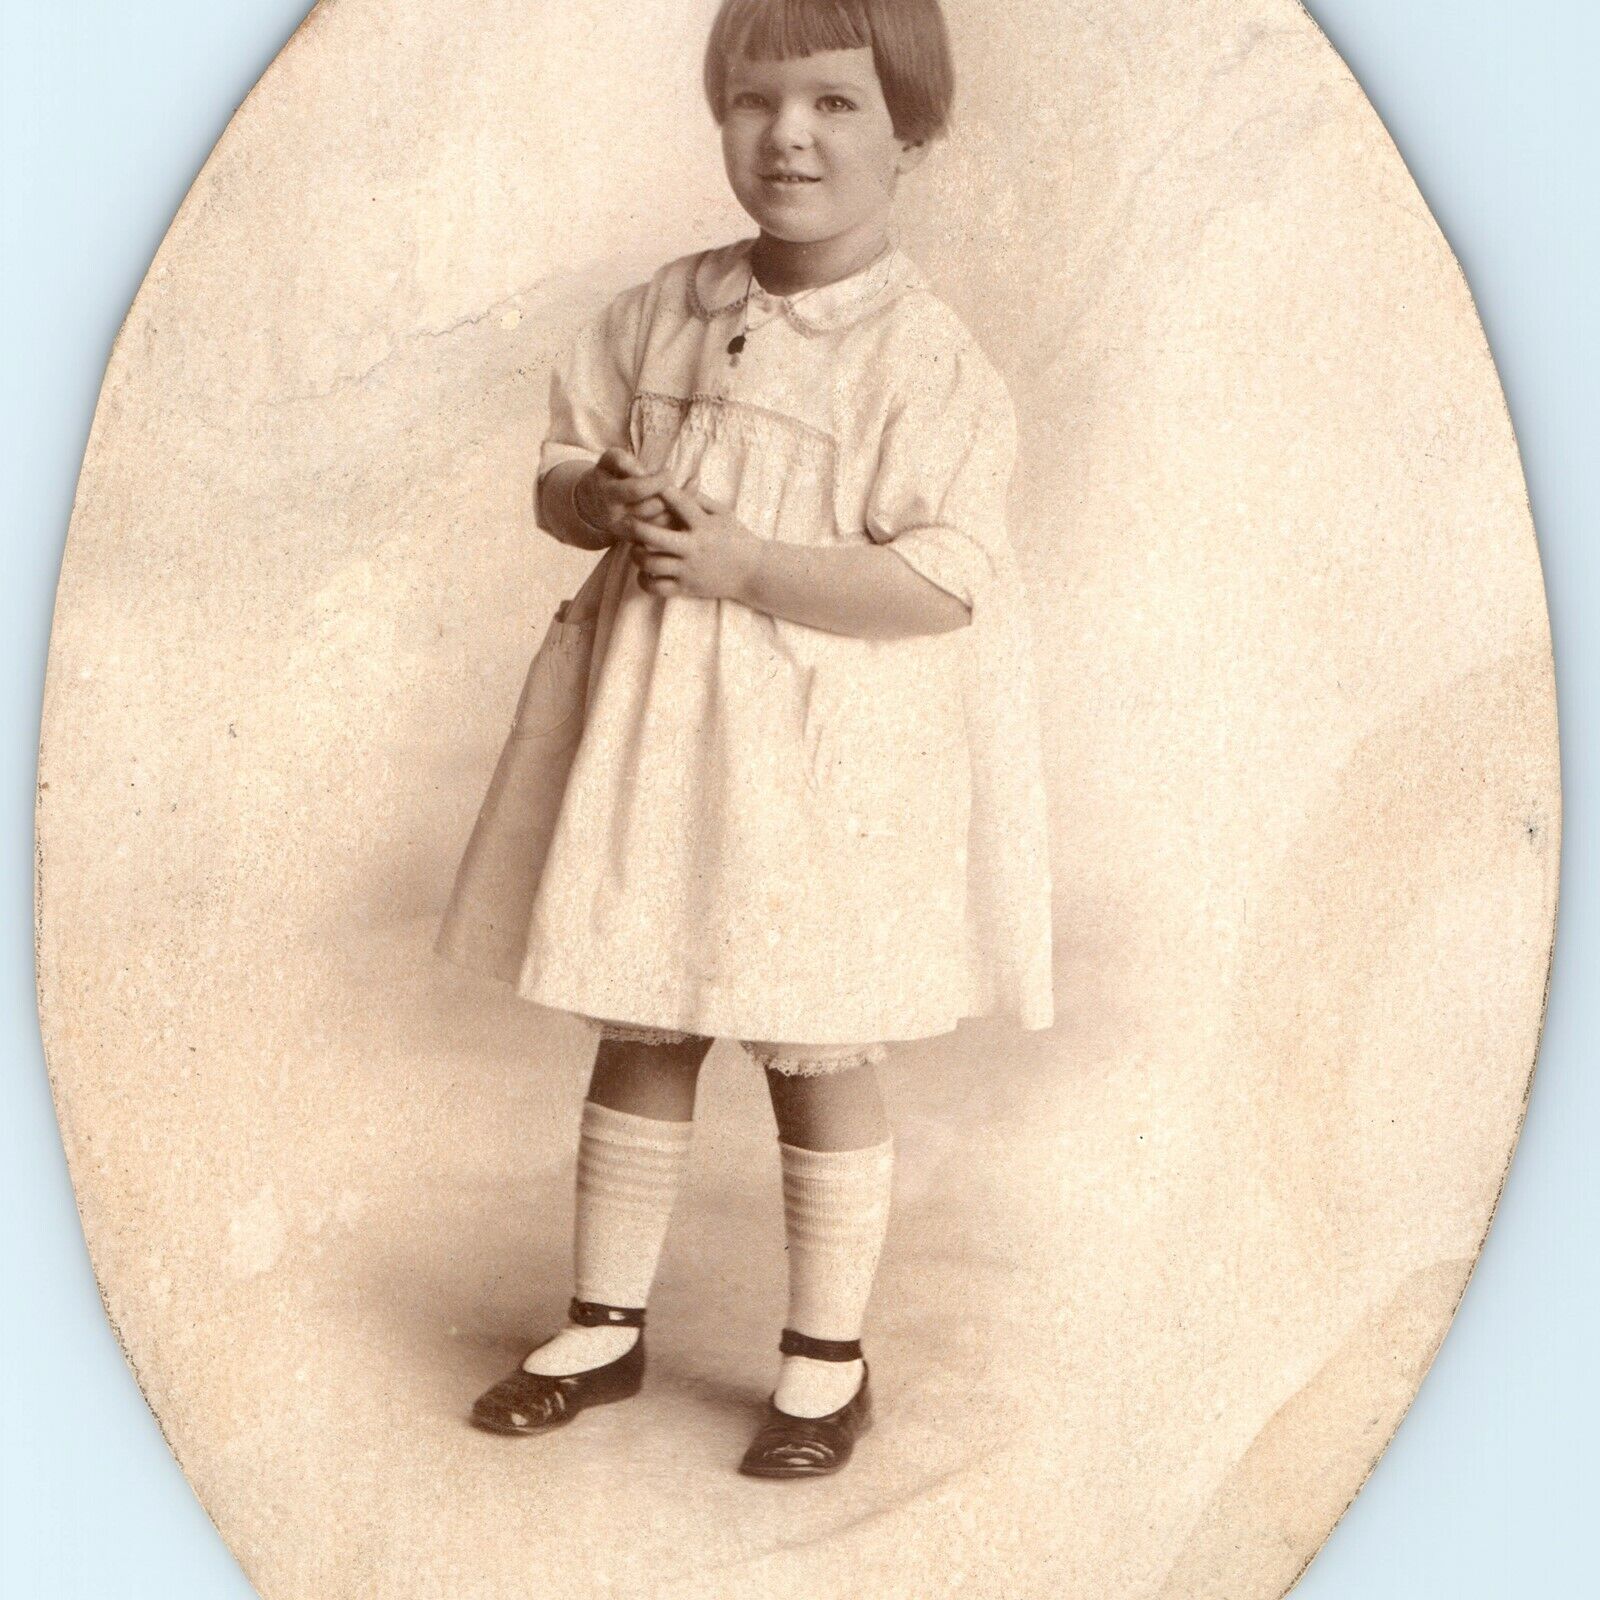 c1900s Cute Smiling Young Little Girl Oval Photograph Antique Dress B4